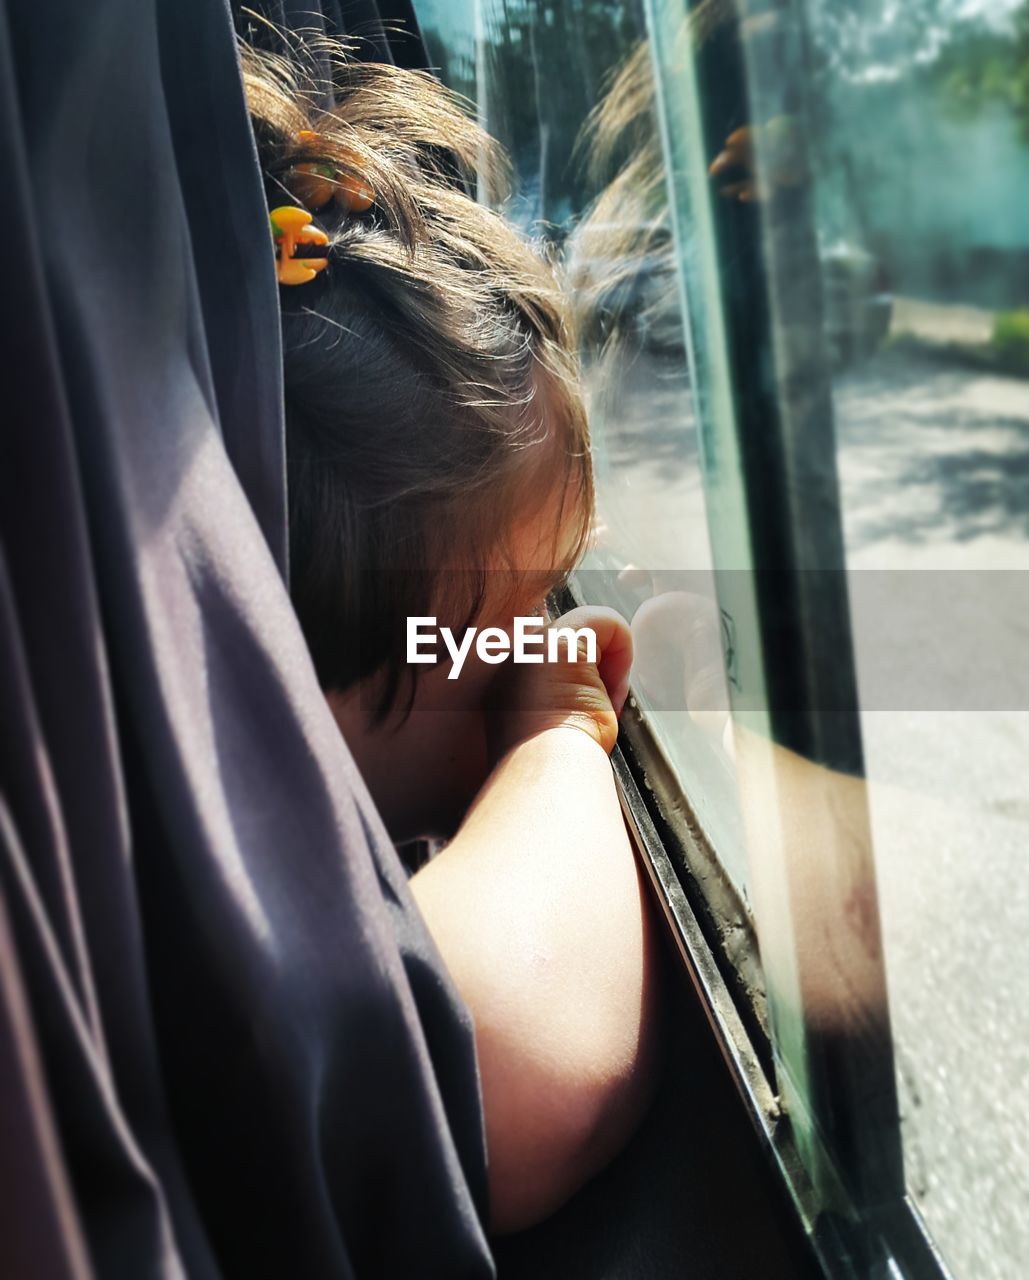 Girl sitting at window in vehicle